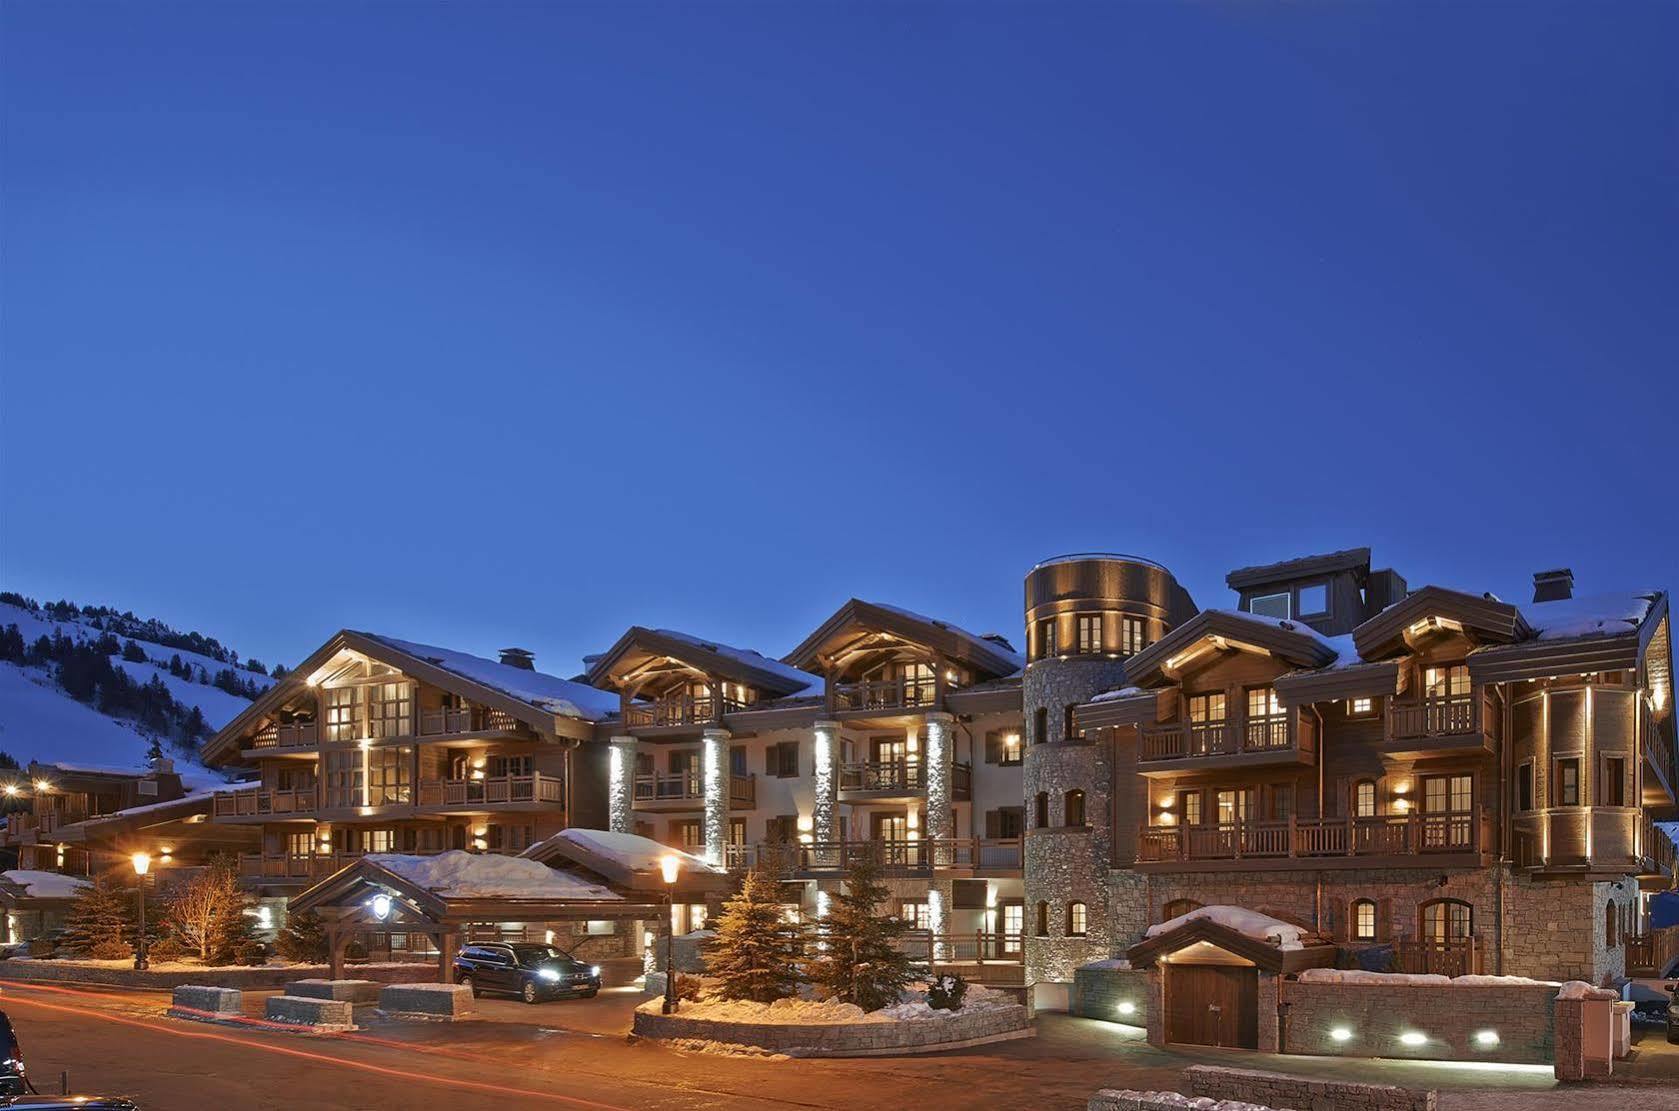 L'Apogee Courchevel - An Oetker Collection Hotel ภายนอก รูปภาพ